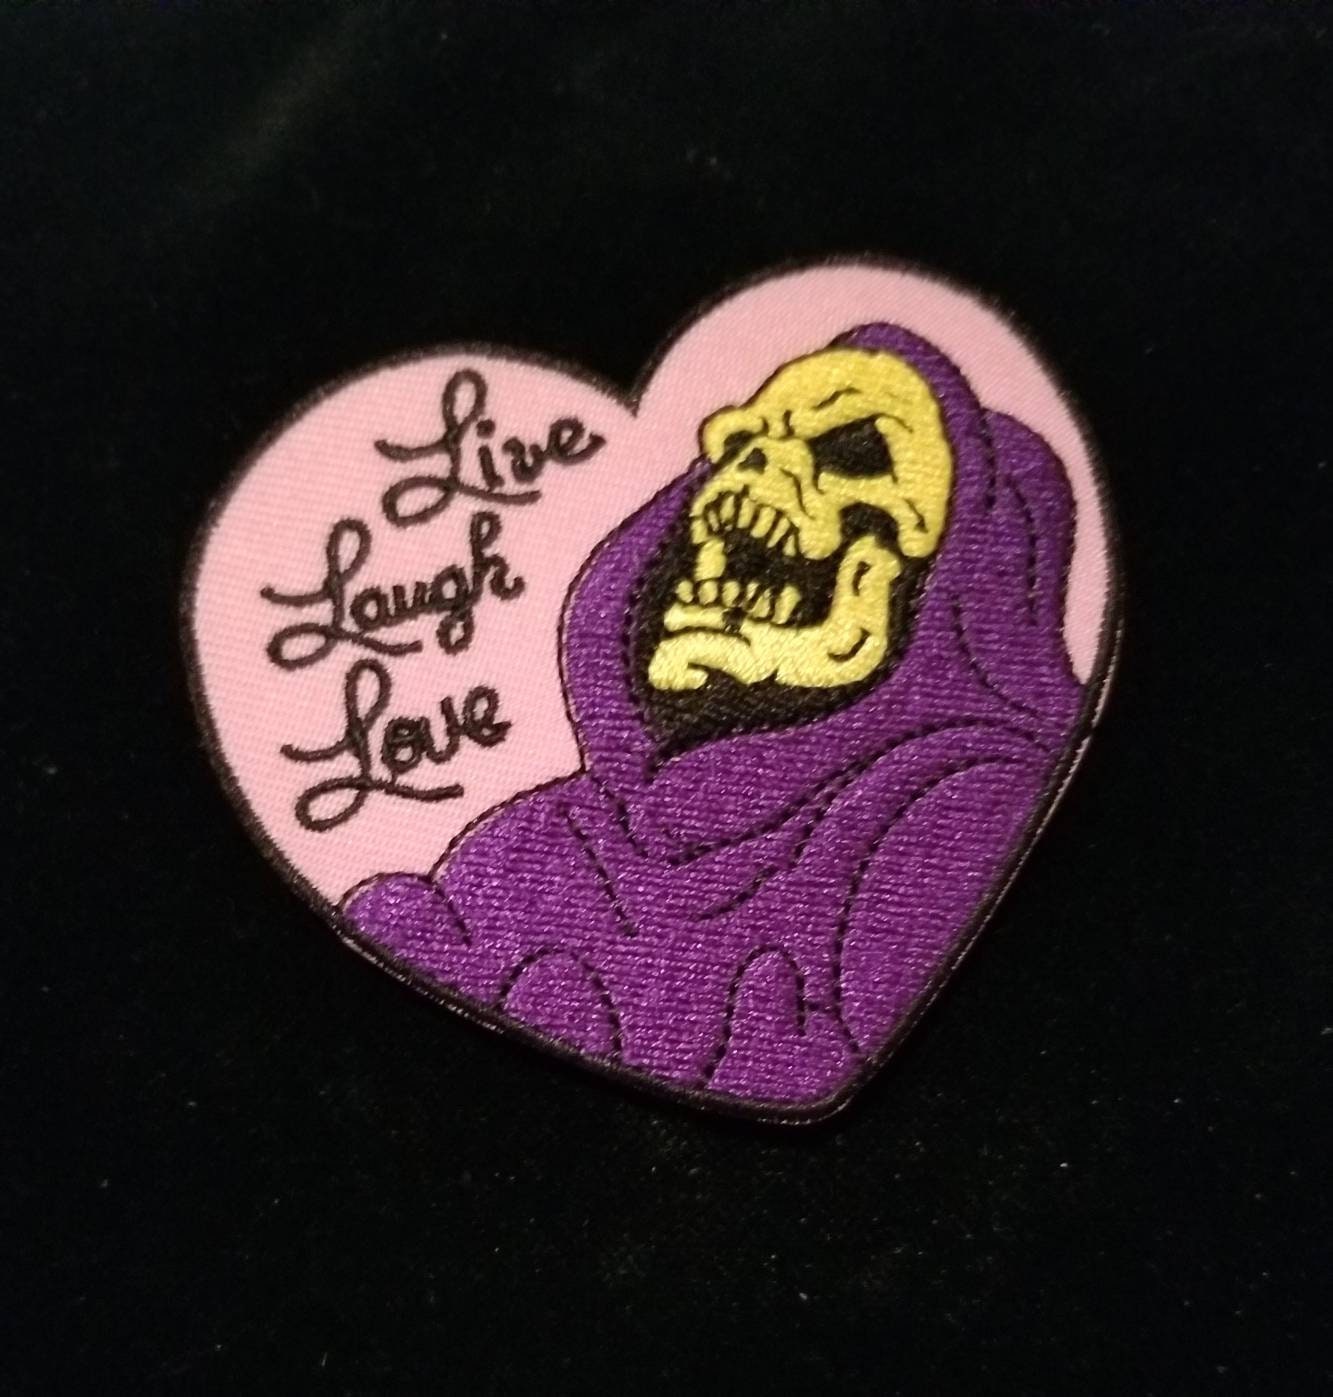 Lurk Laugh Loathe Patches Skeletor Patch Meme Patch Funny Patch